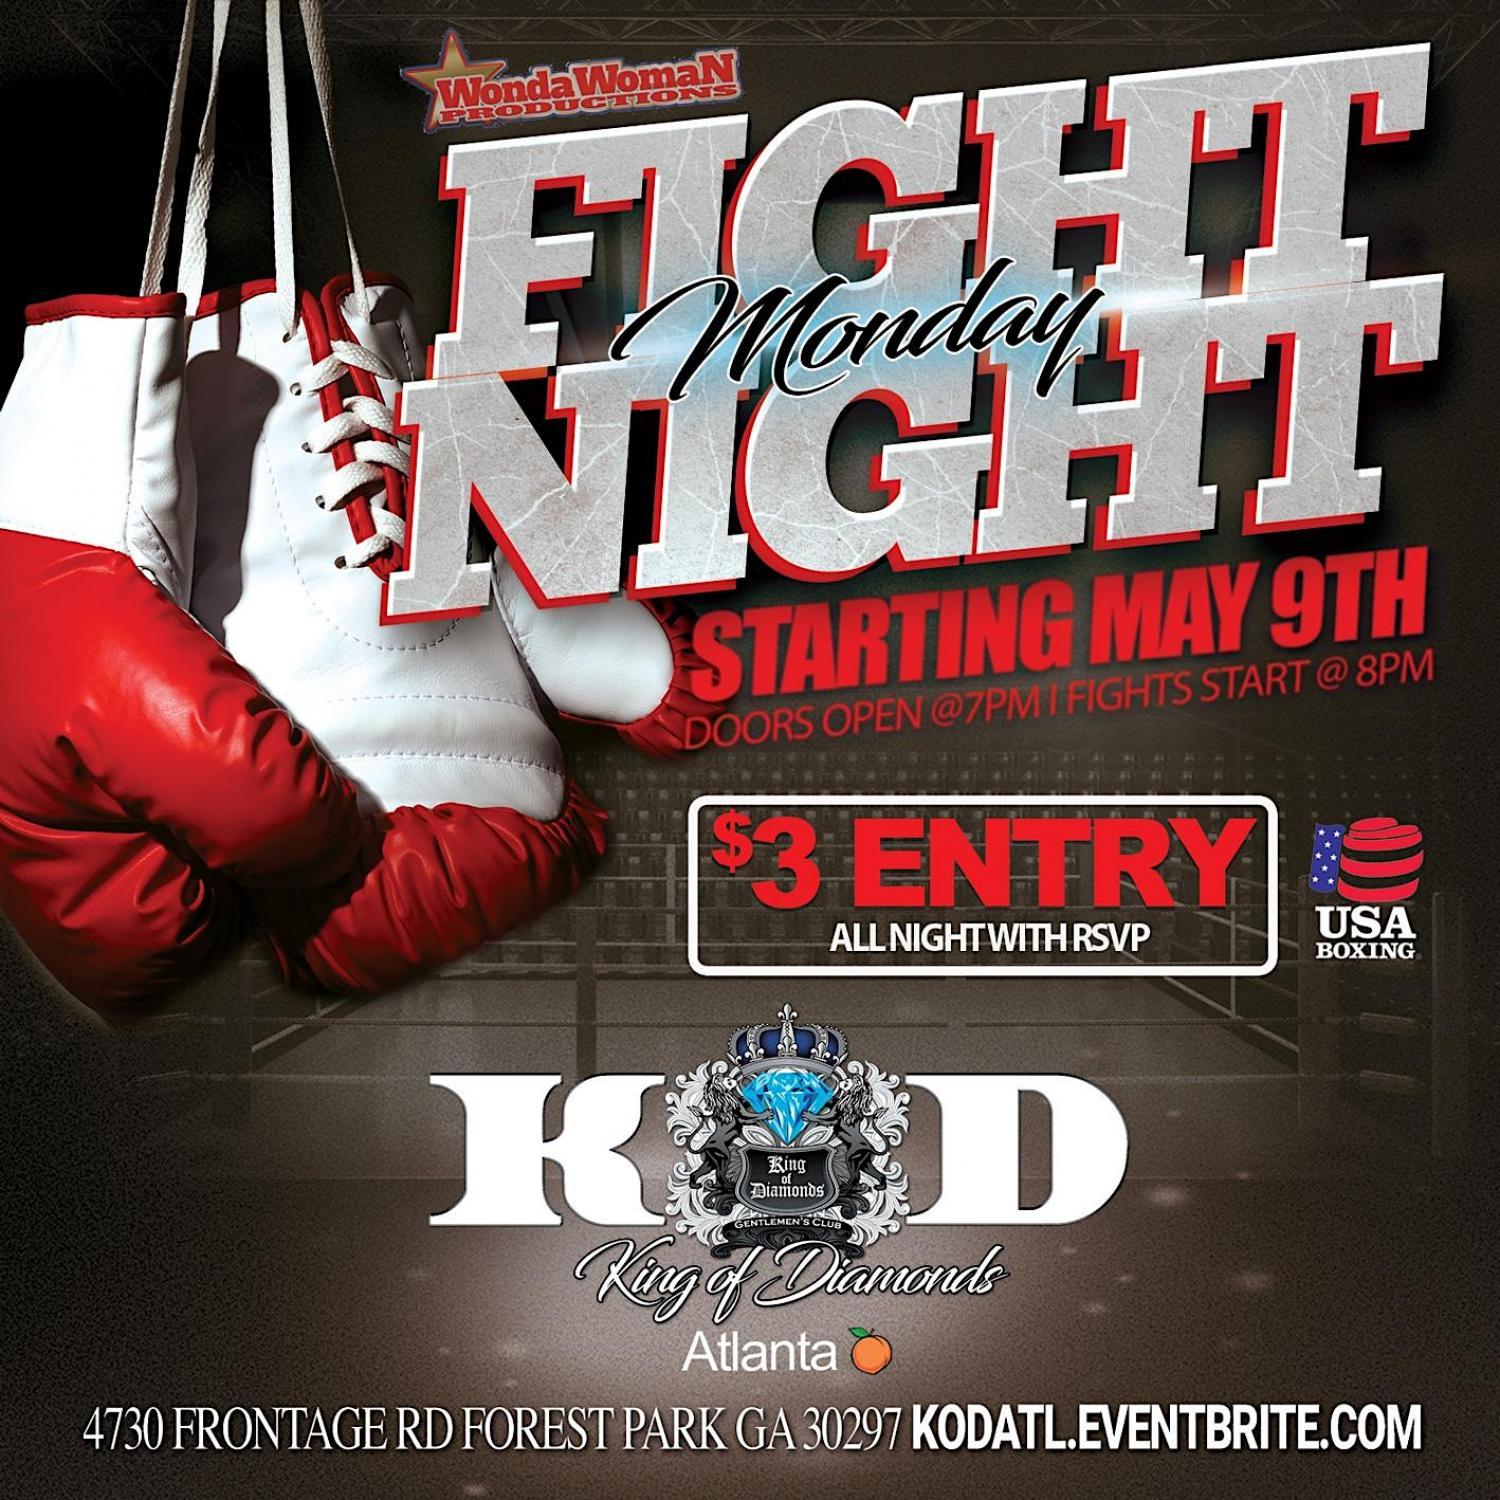 Monday Night Fight Night Live with USAA boxing!
Mon Dec 26, 7:00 PM - Tue Dec 27, 4:00 AM
in 80 days